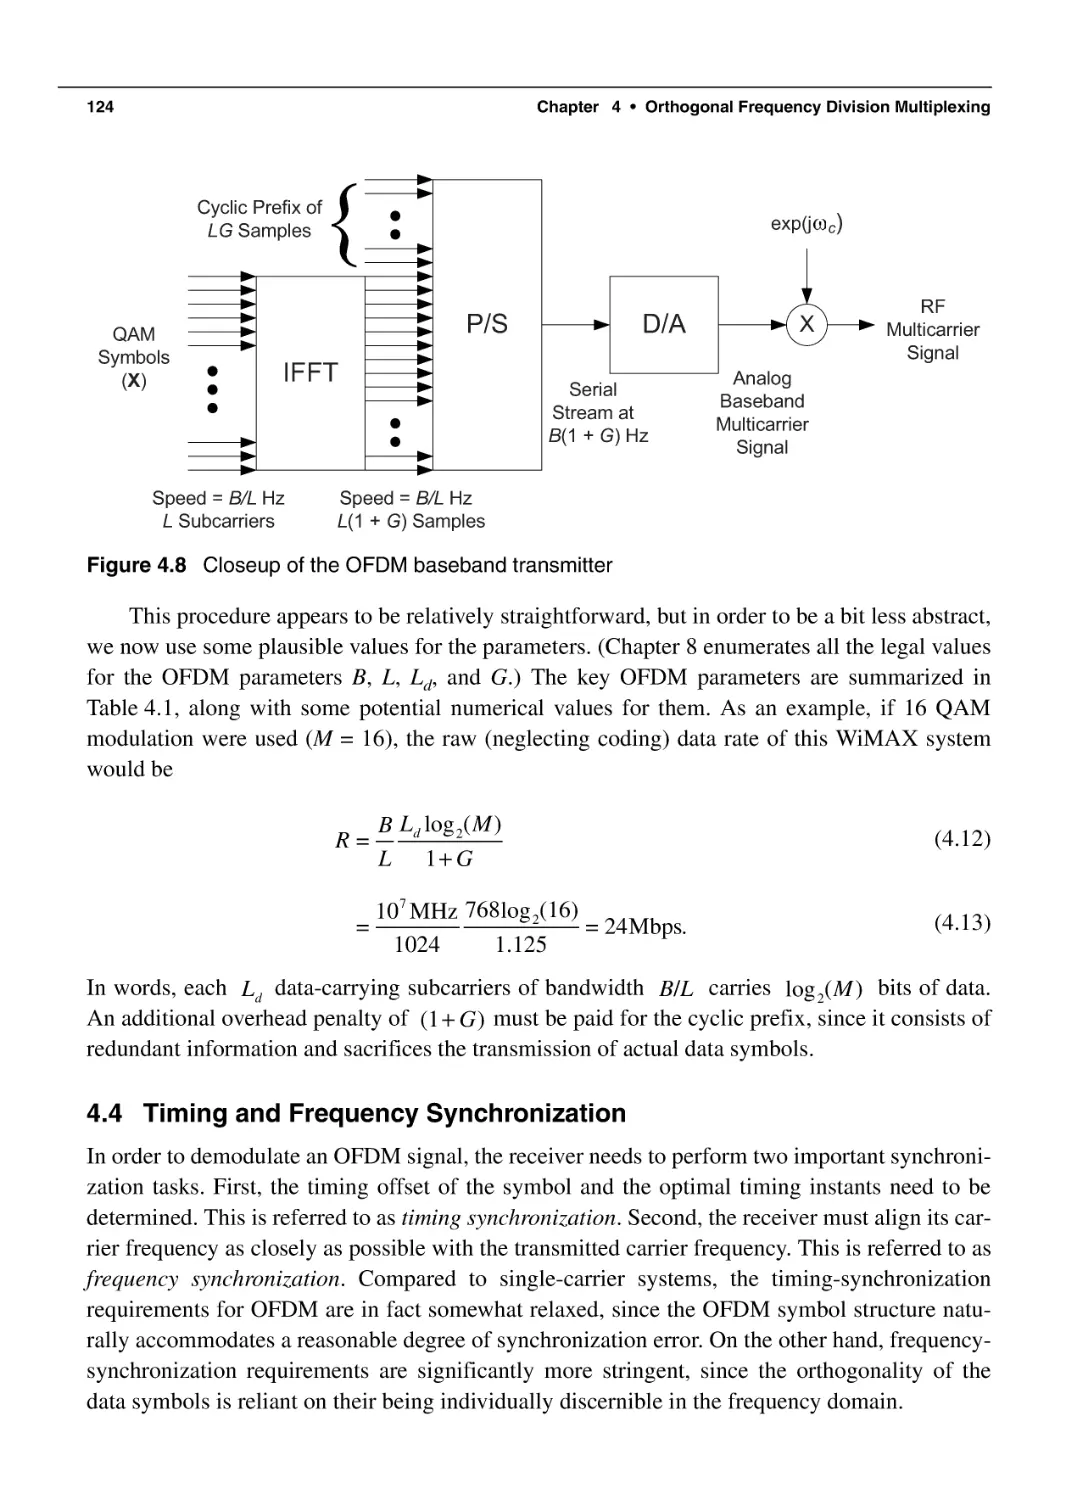 4.4 Timing and Frequency Synchronization